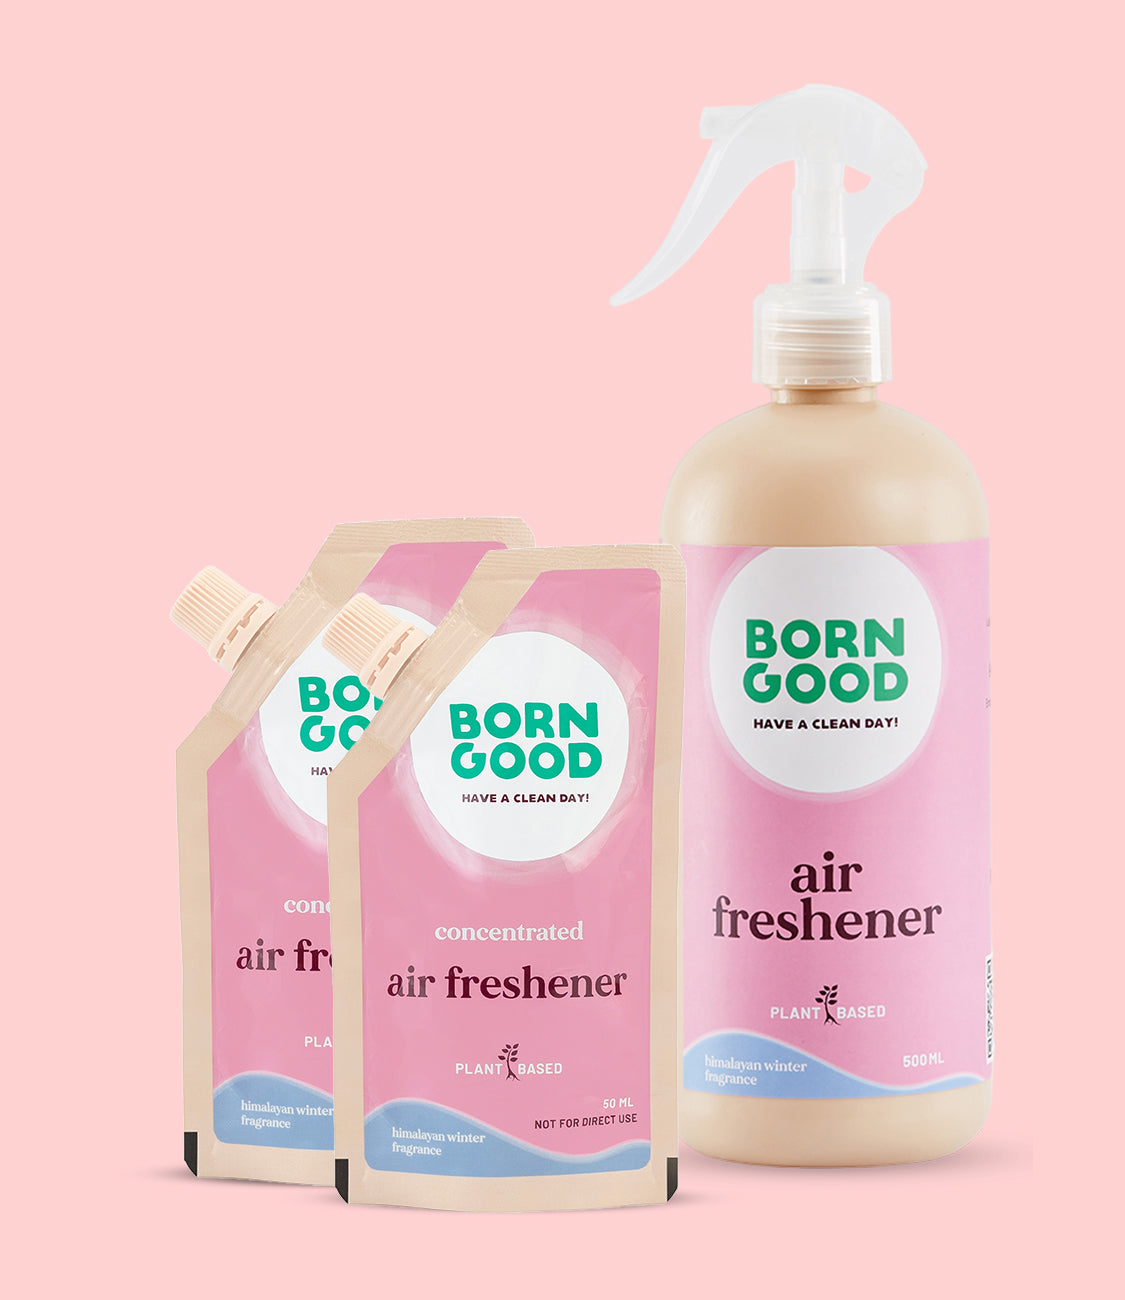 Air Freshener Concentrate